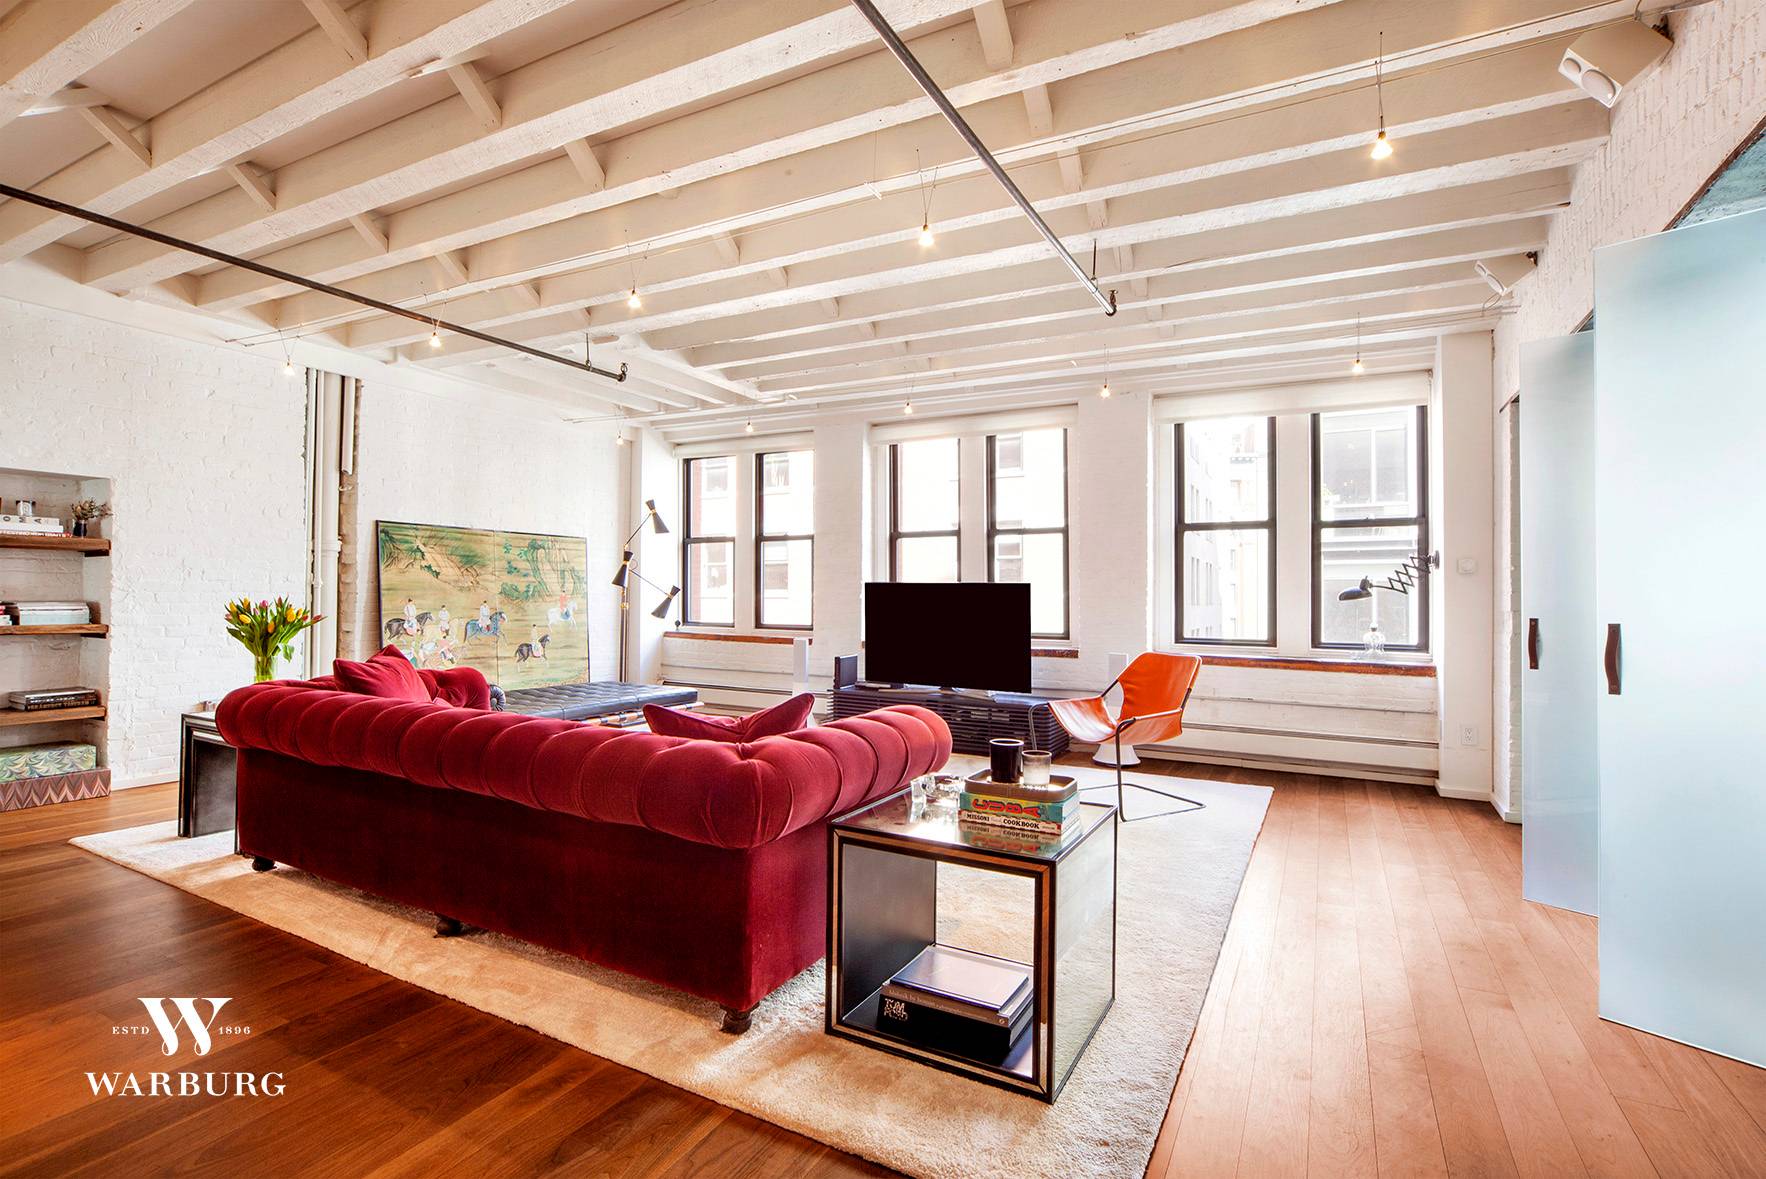 A rare Tribeca loft renovated to the highest standards while preserving and showcasing its original details and character.